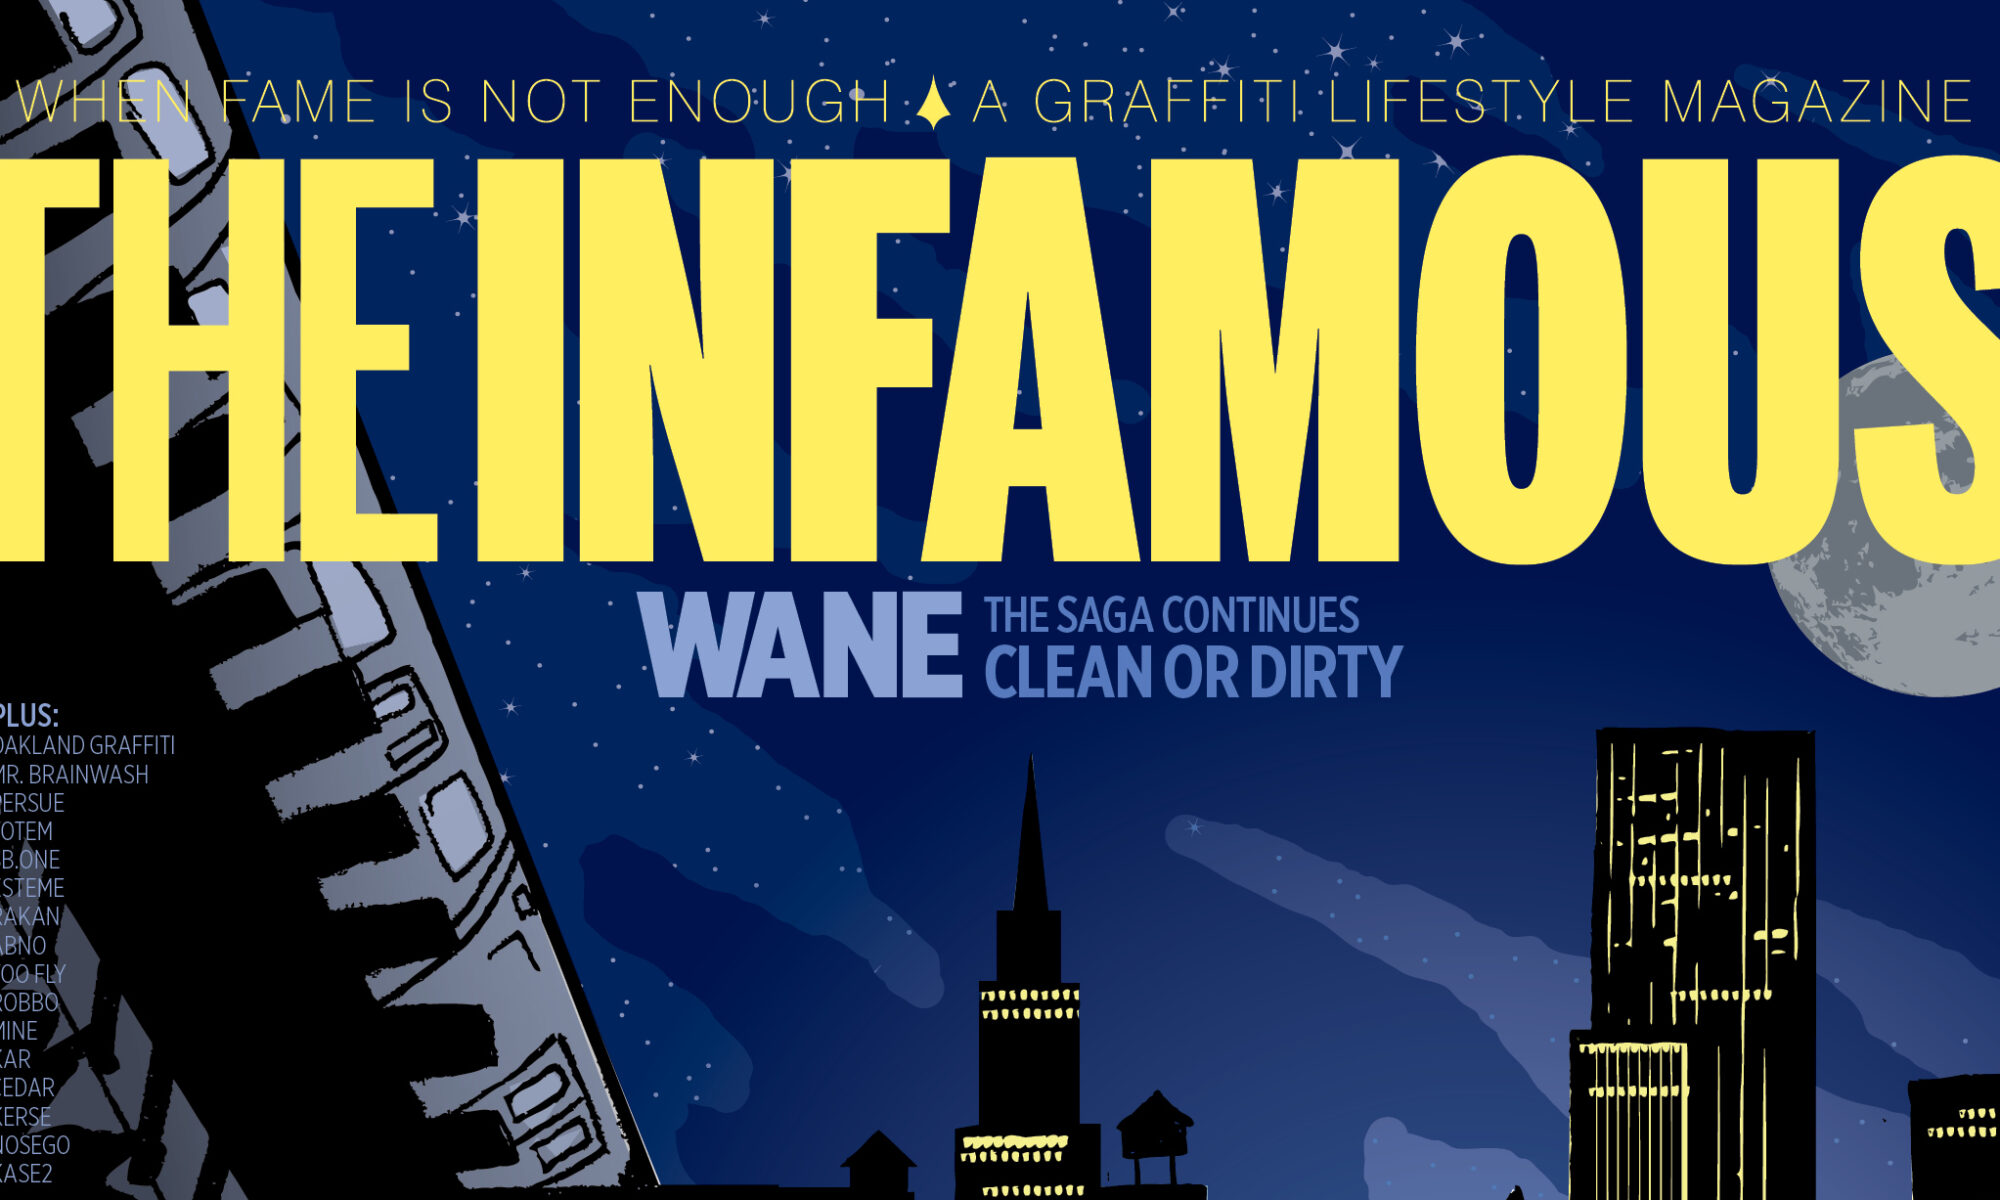 Cover of Issue 5 of The Infamous magazine, 2011. Illustration by Persue.